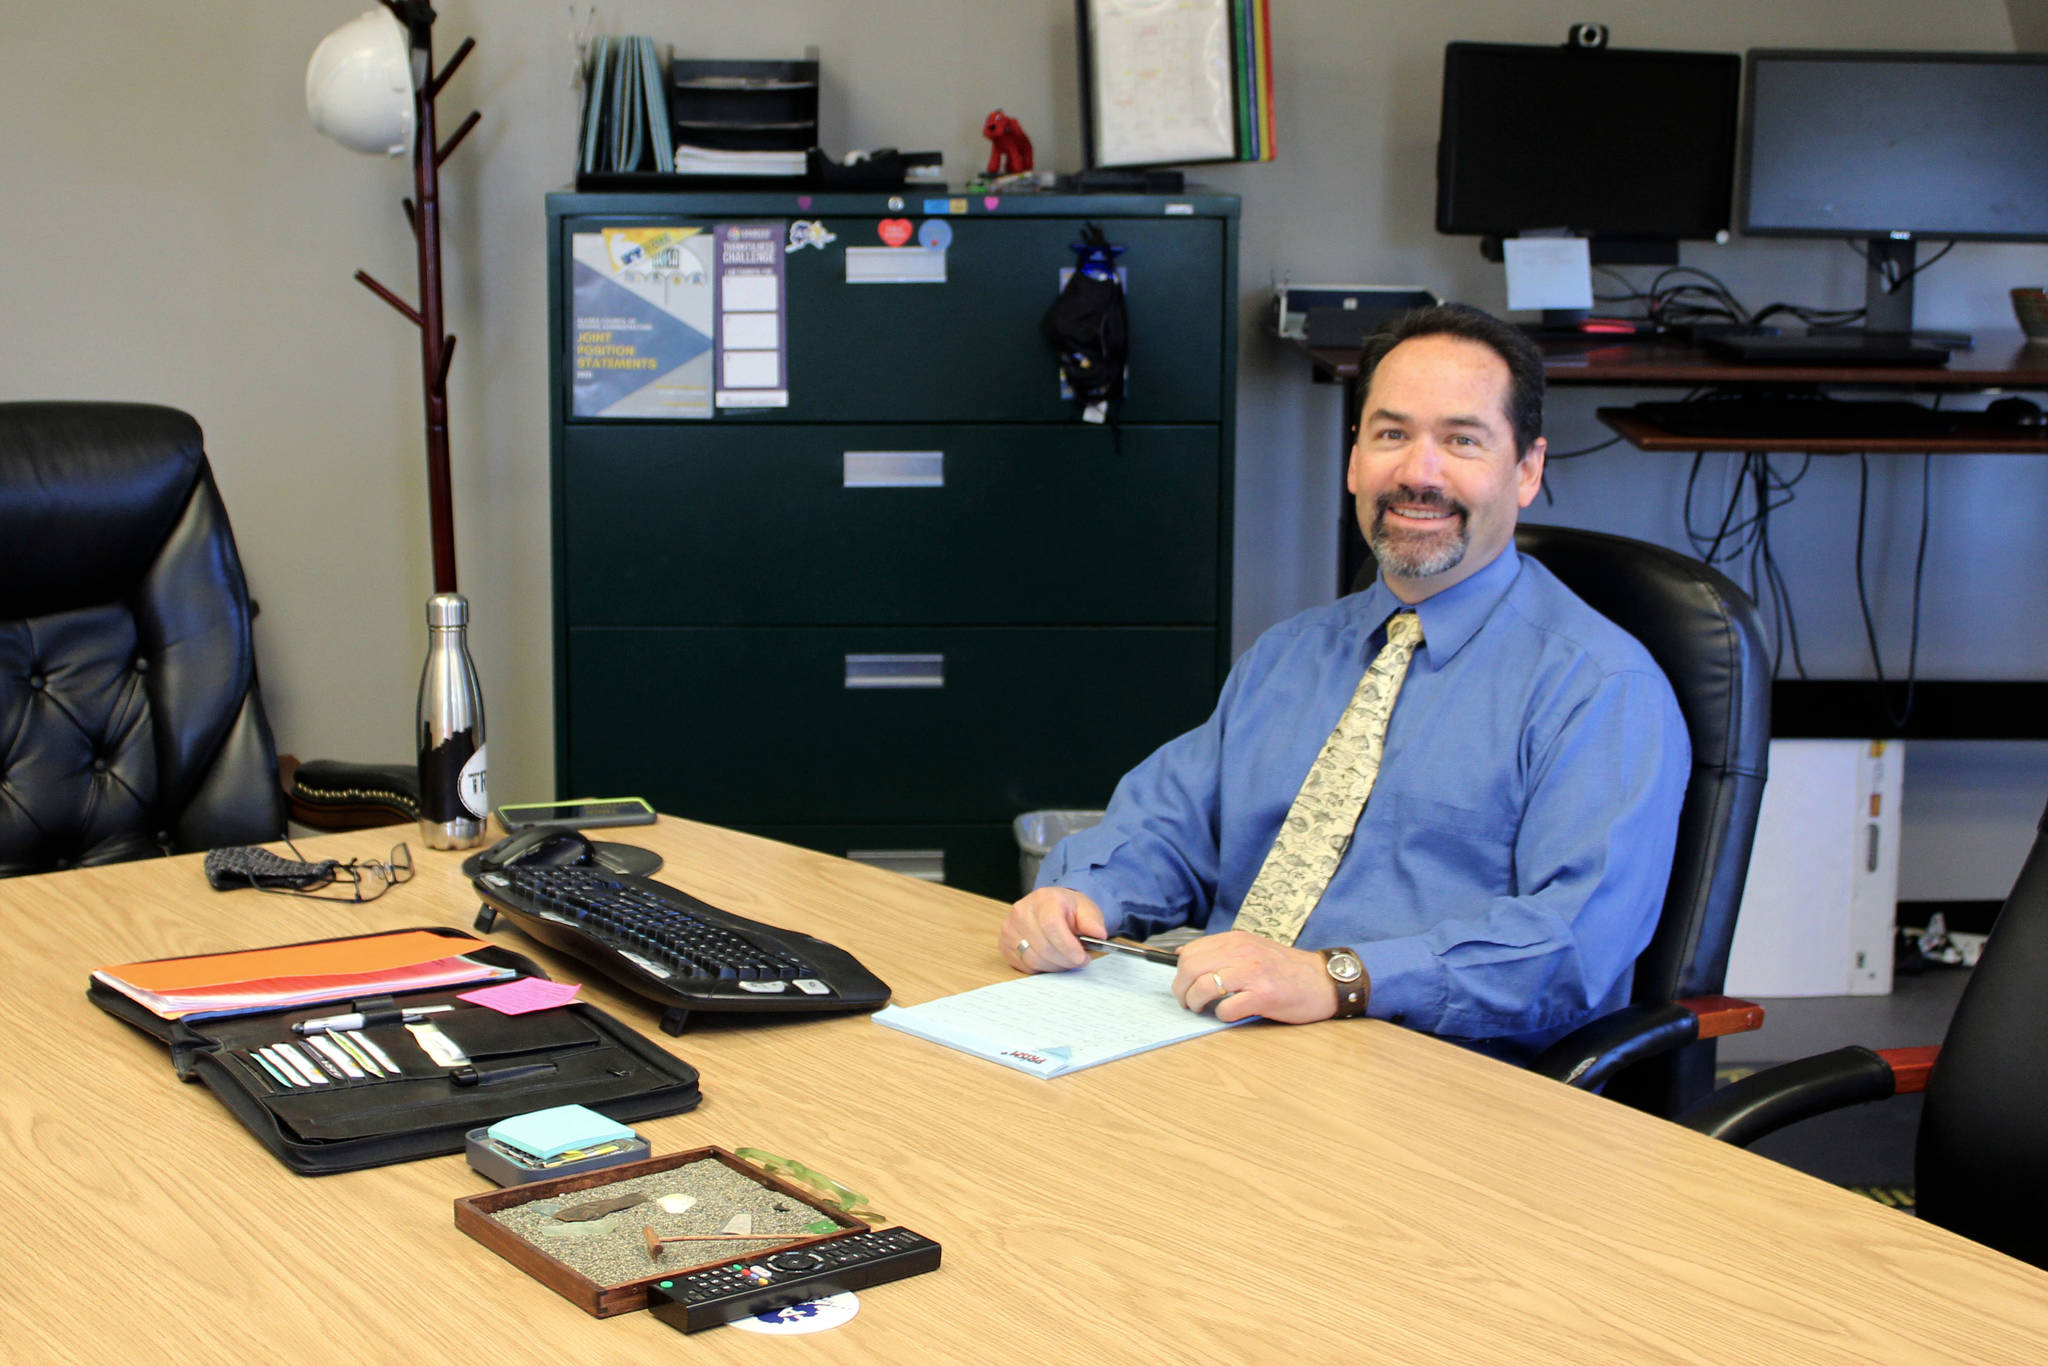 KPBSD Superintendent John O’Brien sits in his office in the George A. Navarre Administration Building, on Monday, May 24, 2021 in Soldotna, Alaska. (Ashlyn O’Hara/Peninsula Clarion)